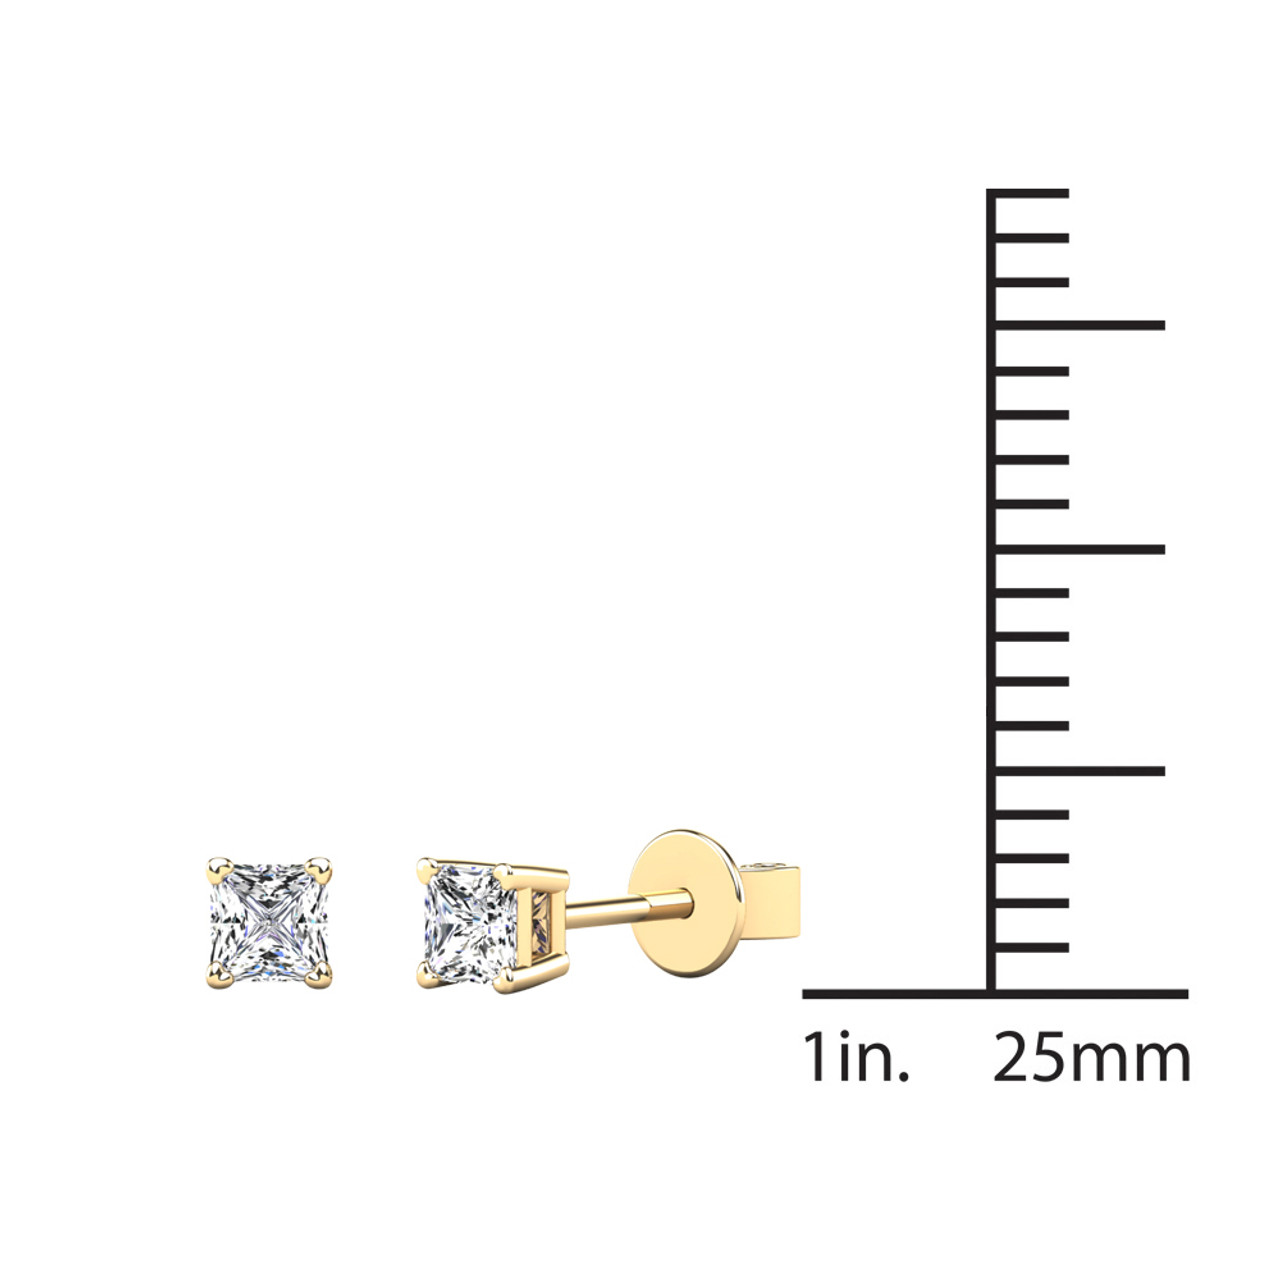 10K Yellow Gold Princess Cut 1/6CT Diamond Solitaire Earrings product image